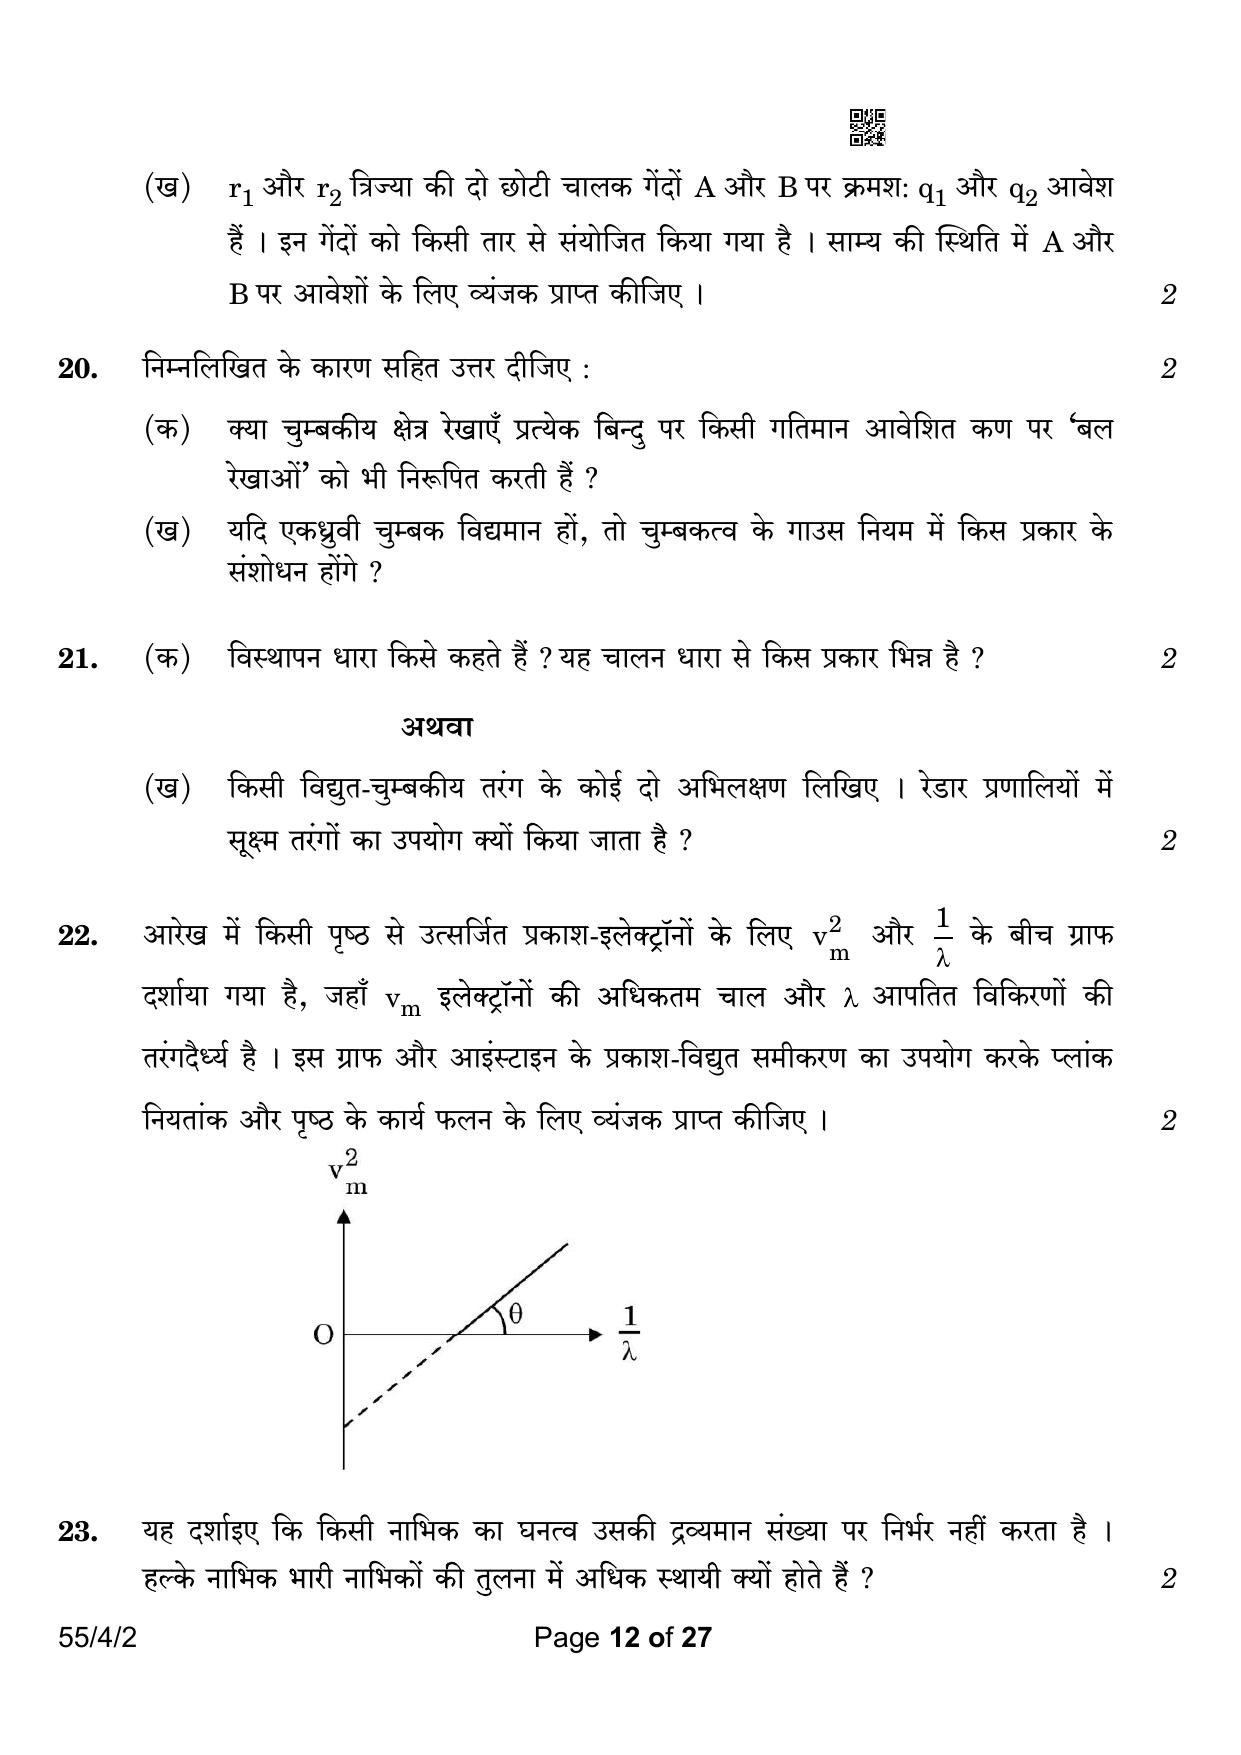 CBSE Class 12 55-4-2 Physics 2023 Question Paper - Page 12